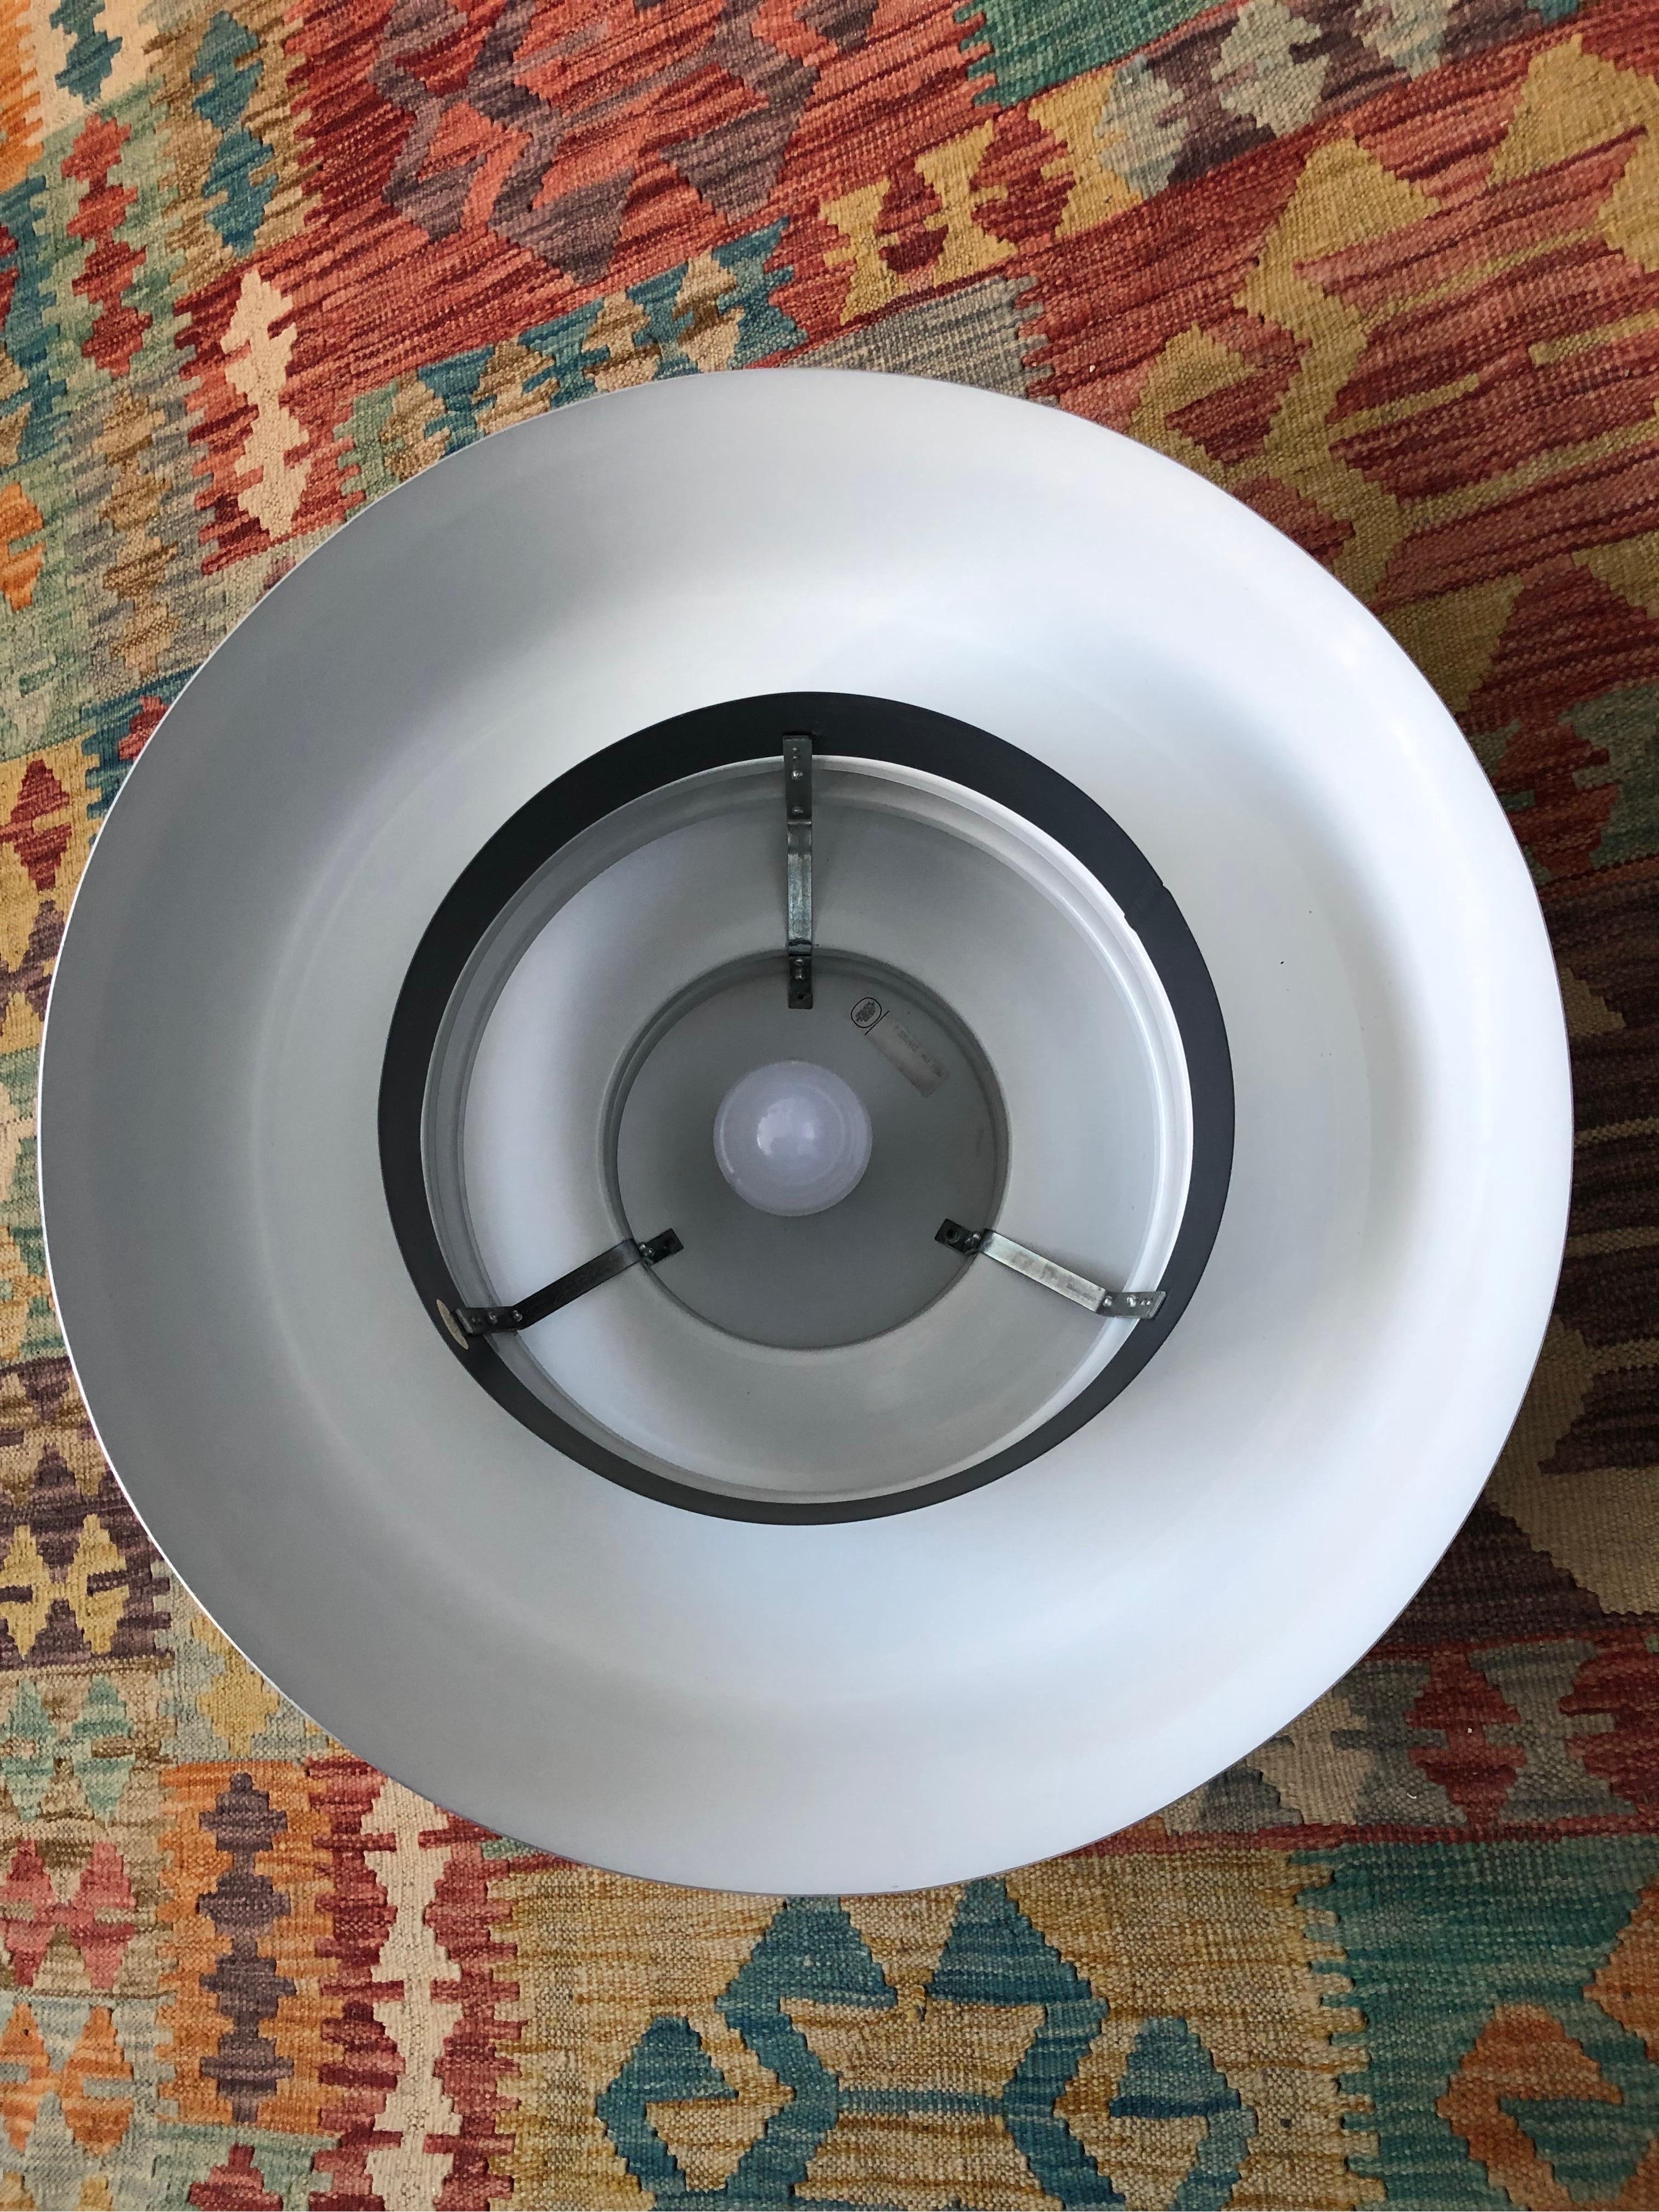 Hand-Crafted Vintage Hans Agne Jakobsson Pendant Lamp in Brushed Aluminum from the 1960s For Sale